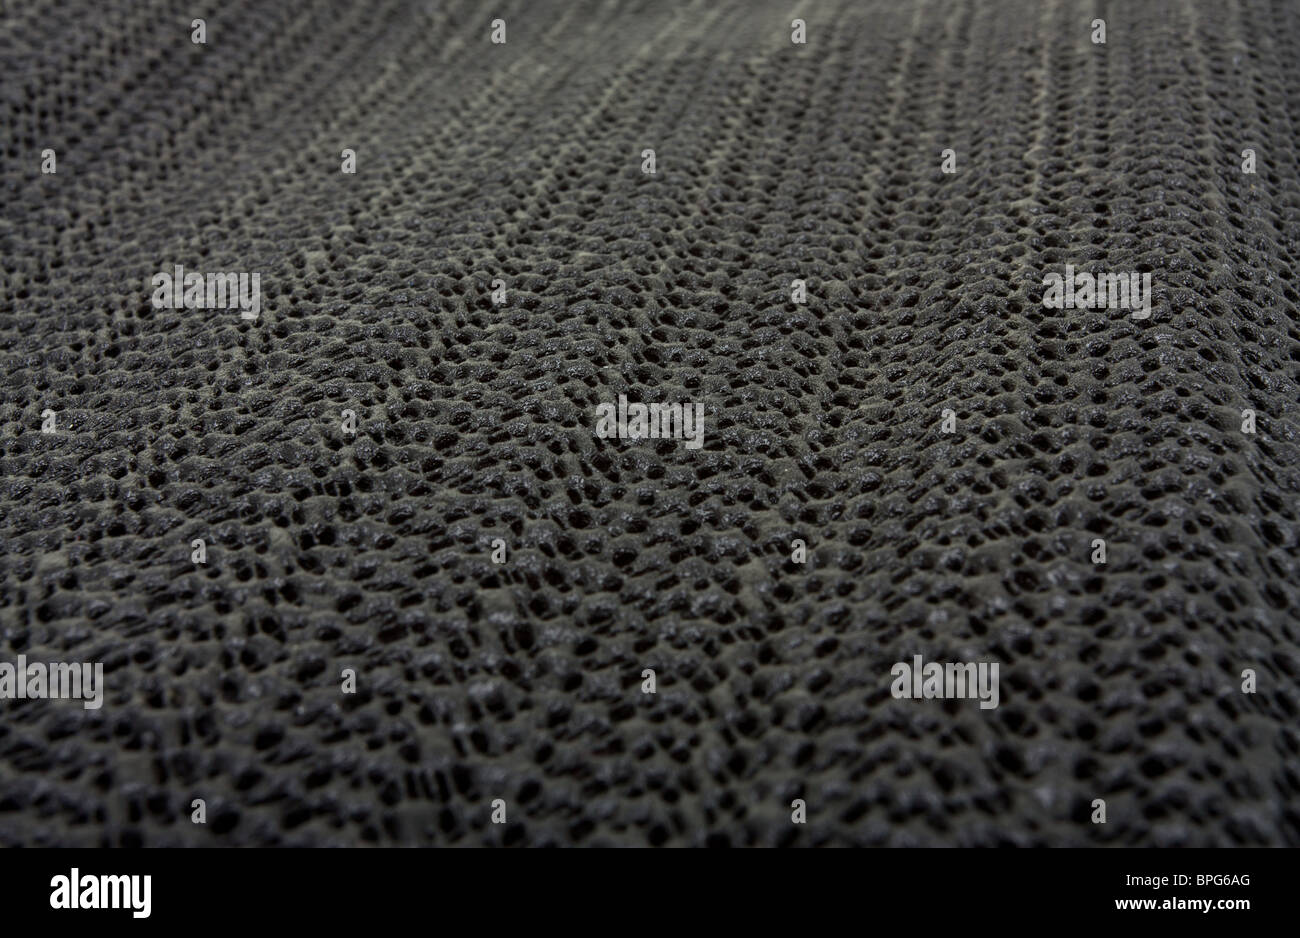 Black non slip Silicon or rubber mat background or texture with shallow focus and diminishing perspective. Stock Photo